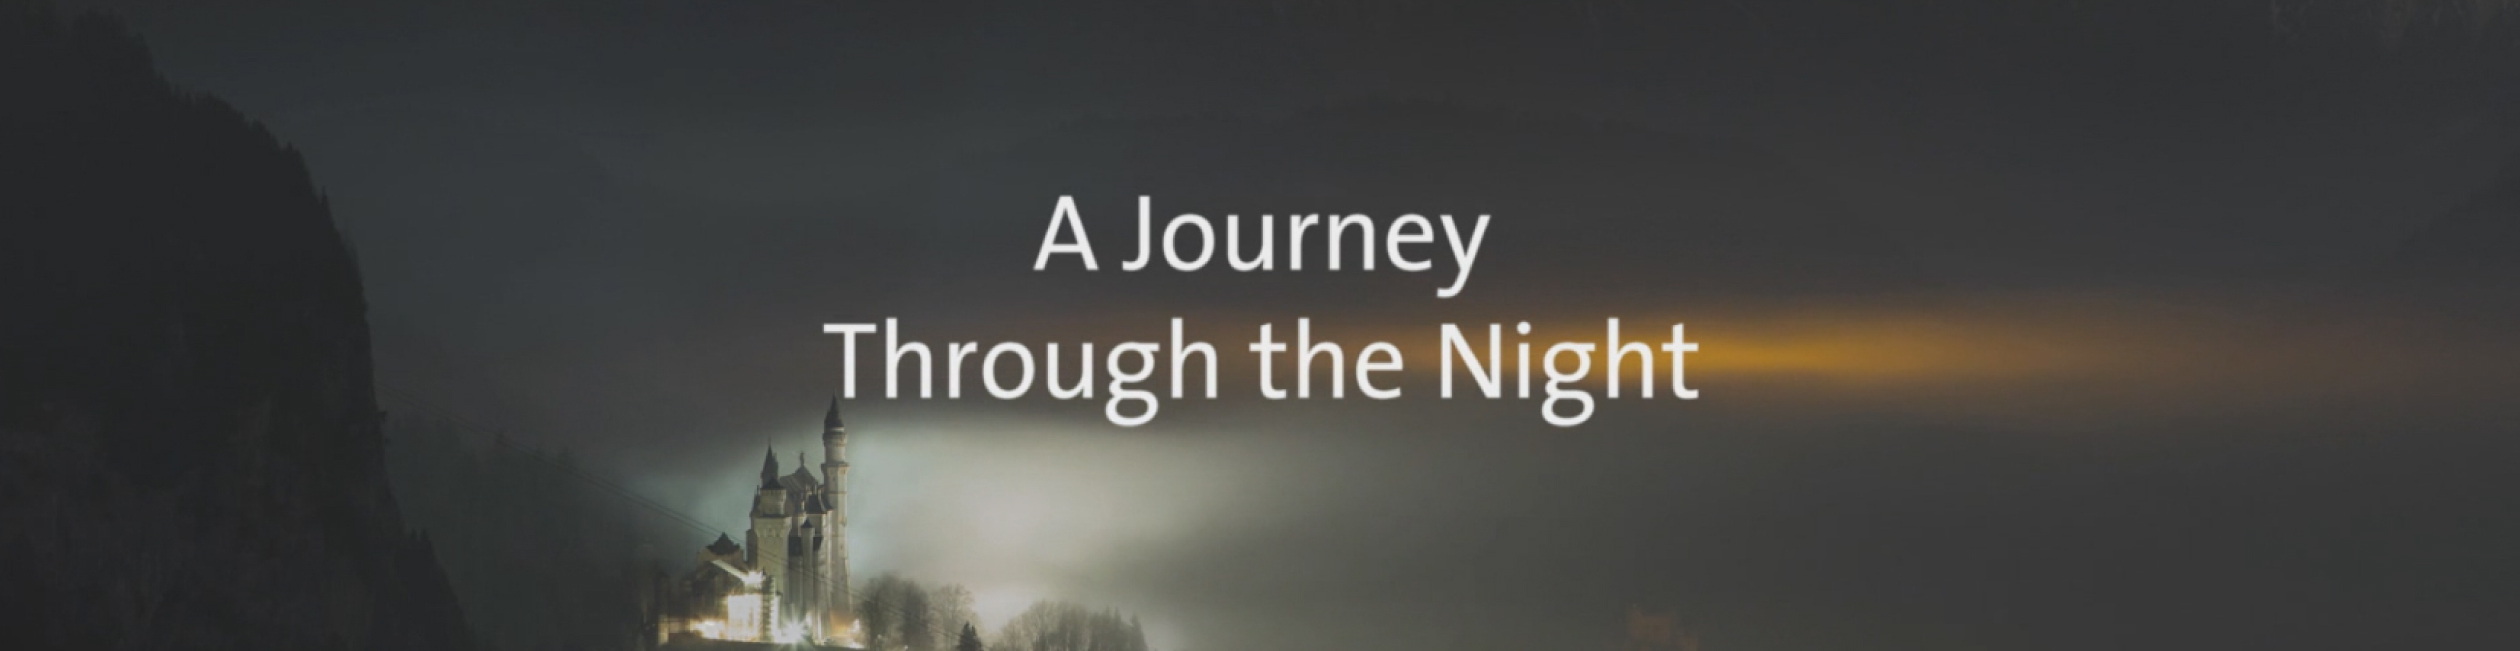 OnlineVoting_Banner_2520x650_a_journey_trough_the_night-02